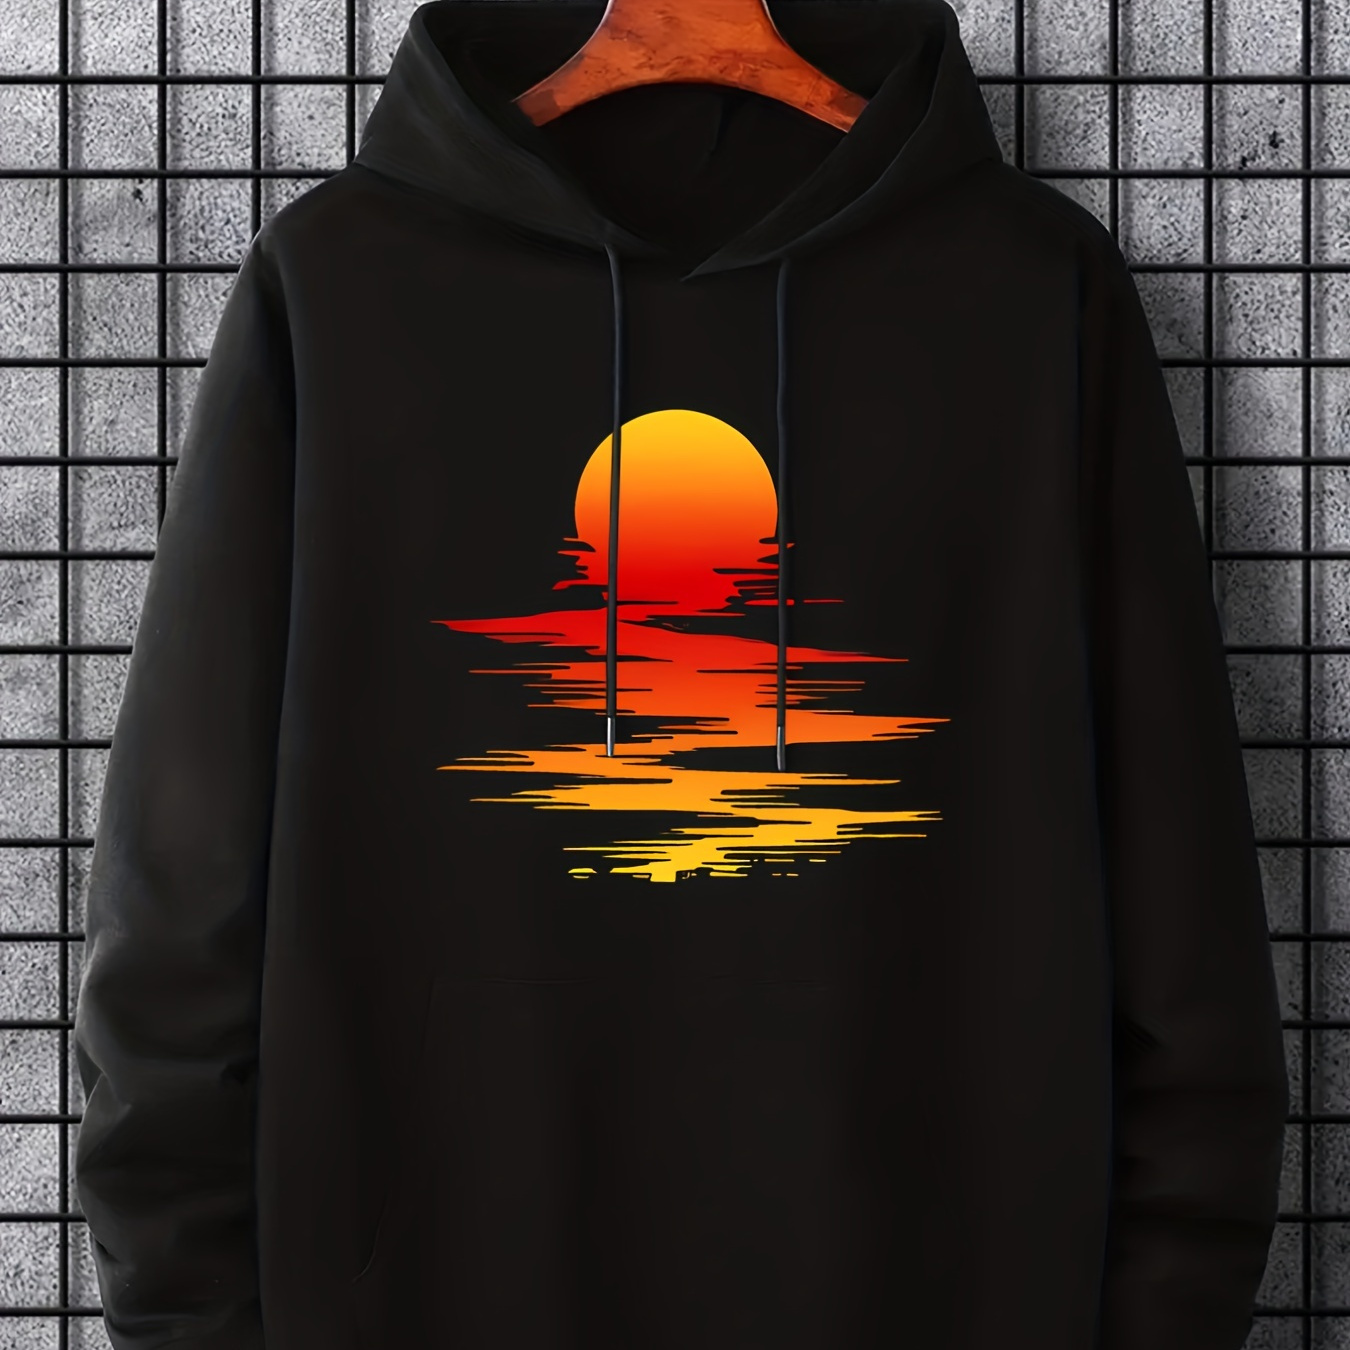 

Sunset Print Hoodie, Cool Hoodies For Men, Men's Casual Graphic Design Pullover Hooded Sweatshirt With Kangaroo Pocket Streetwear For Winter Fall, As Gifts